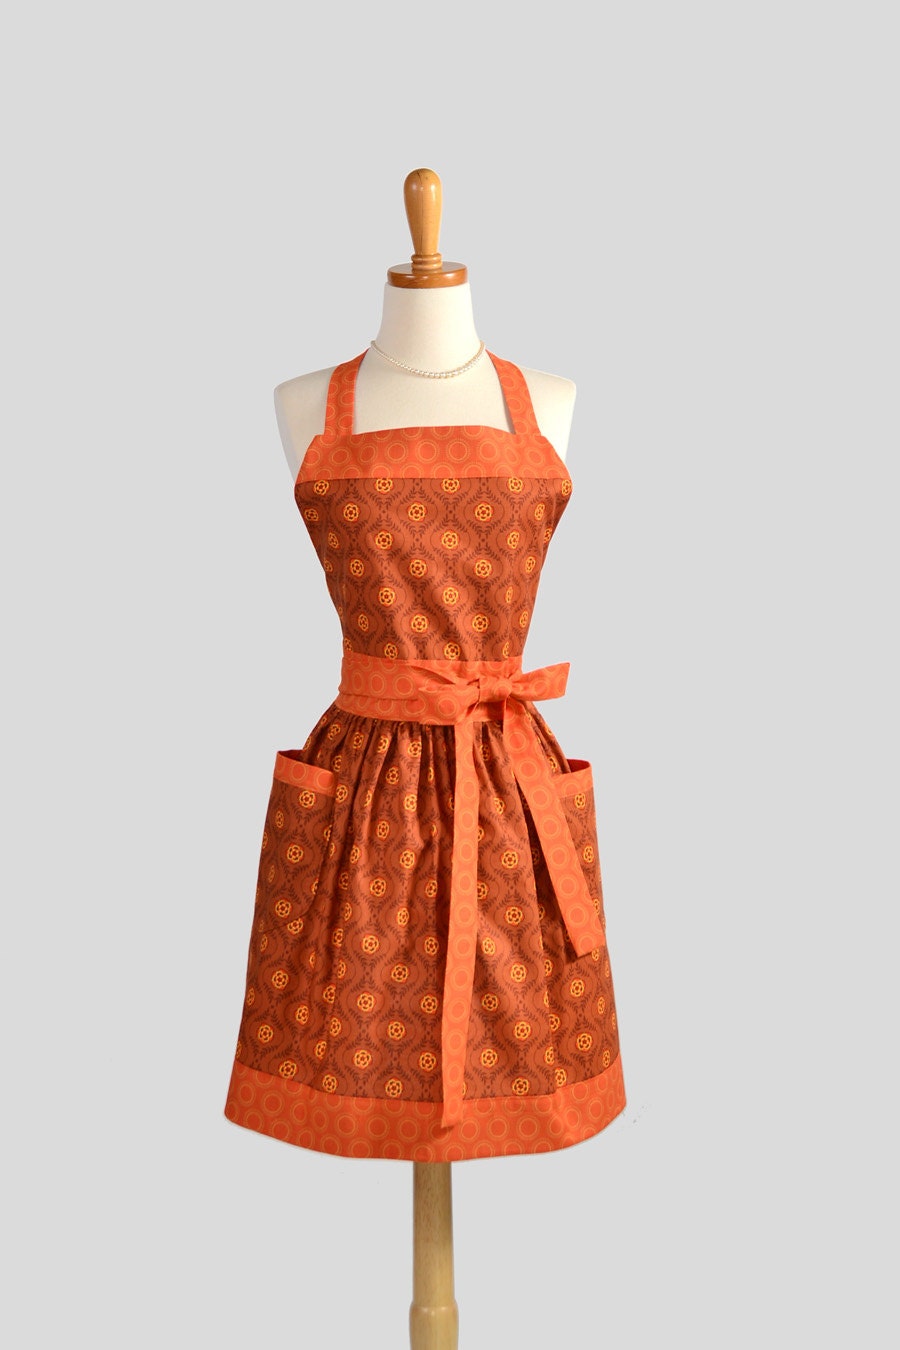 Womens Bib Full Apron . Full Kitchen Apron Handmade in Fall Colors of Riley Blakes  Brown and Orange Perfect for Monogram or Personalization